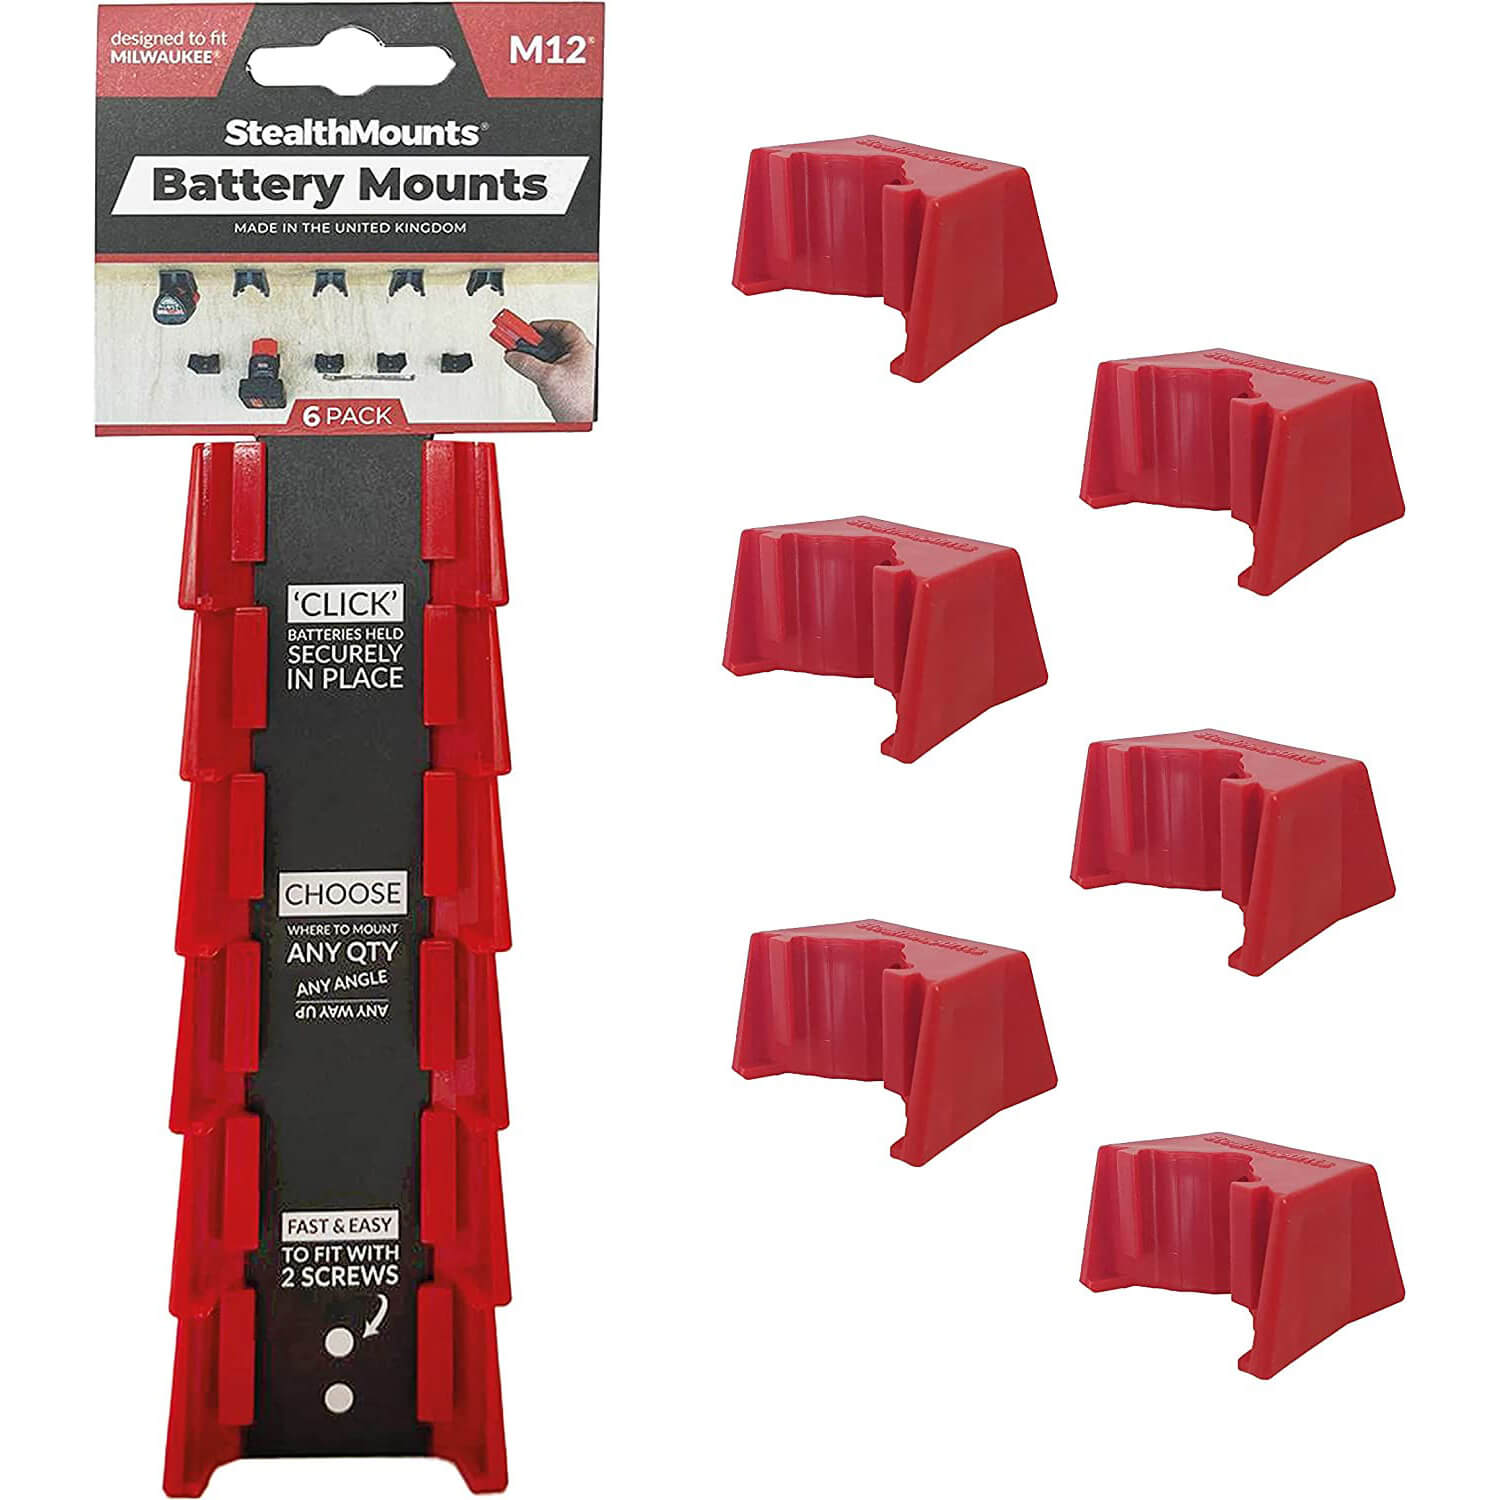 Image of Stealth Mounts 6 Pack Battery Mounts For Milwaukee 12V M12 Batteries Red